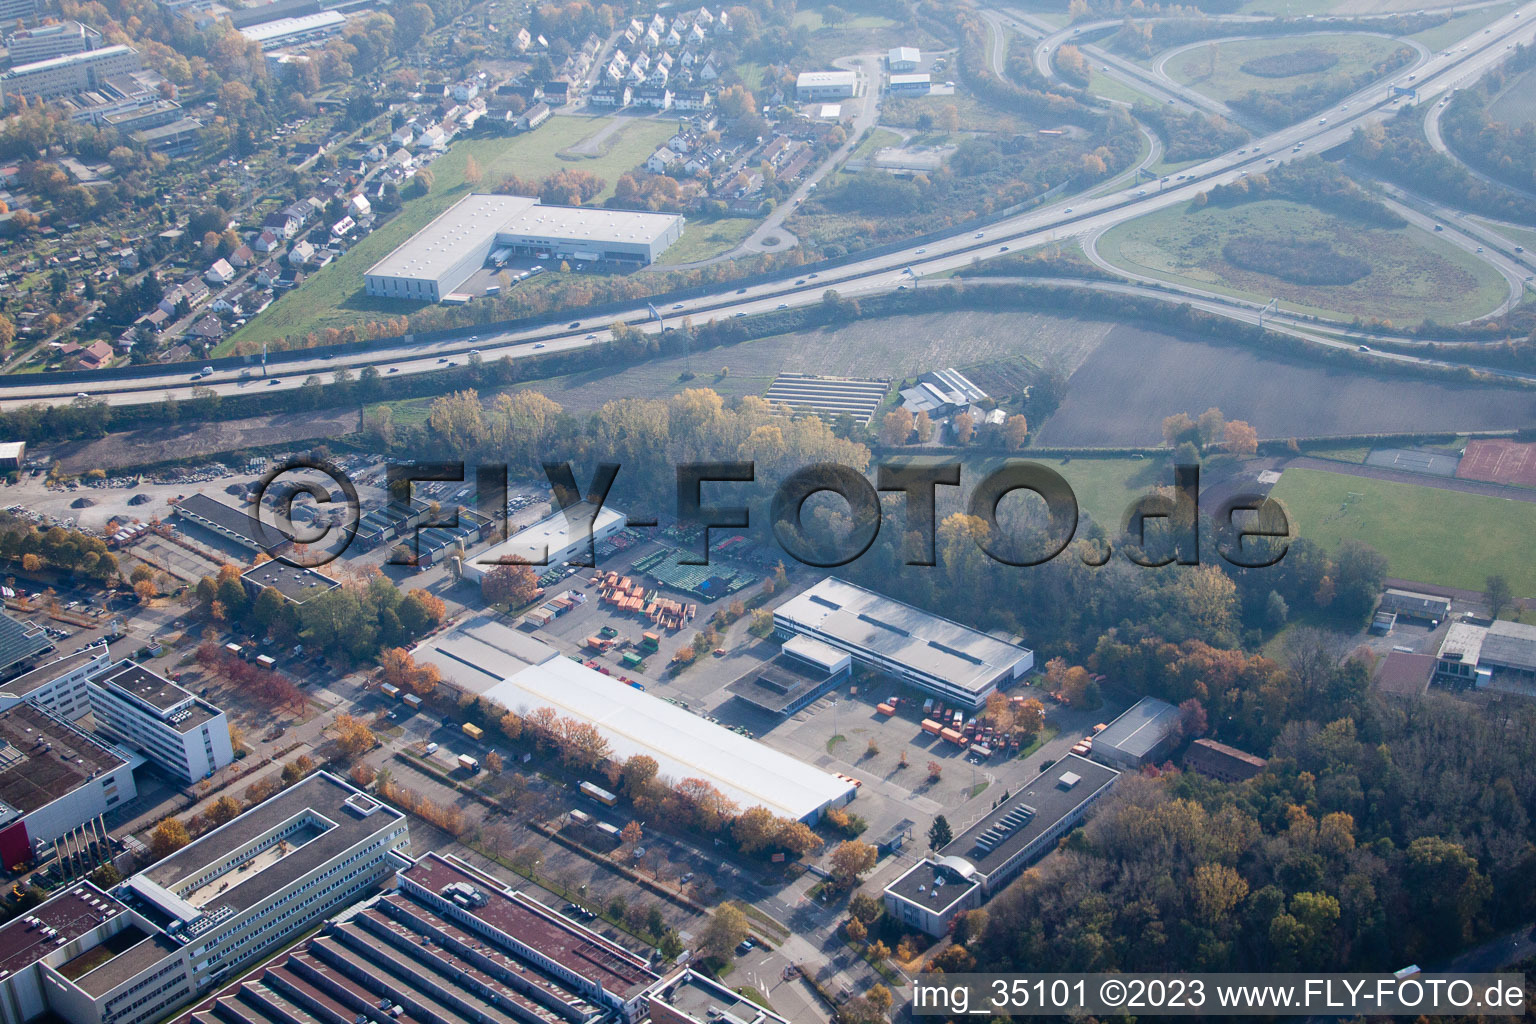 Aerial view of Ottostr in the district Durlach in Karlsruhe in the state Baden-Wuerttemberg, Germany